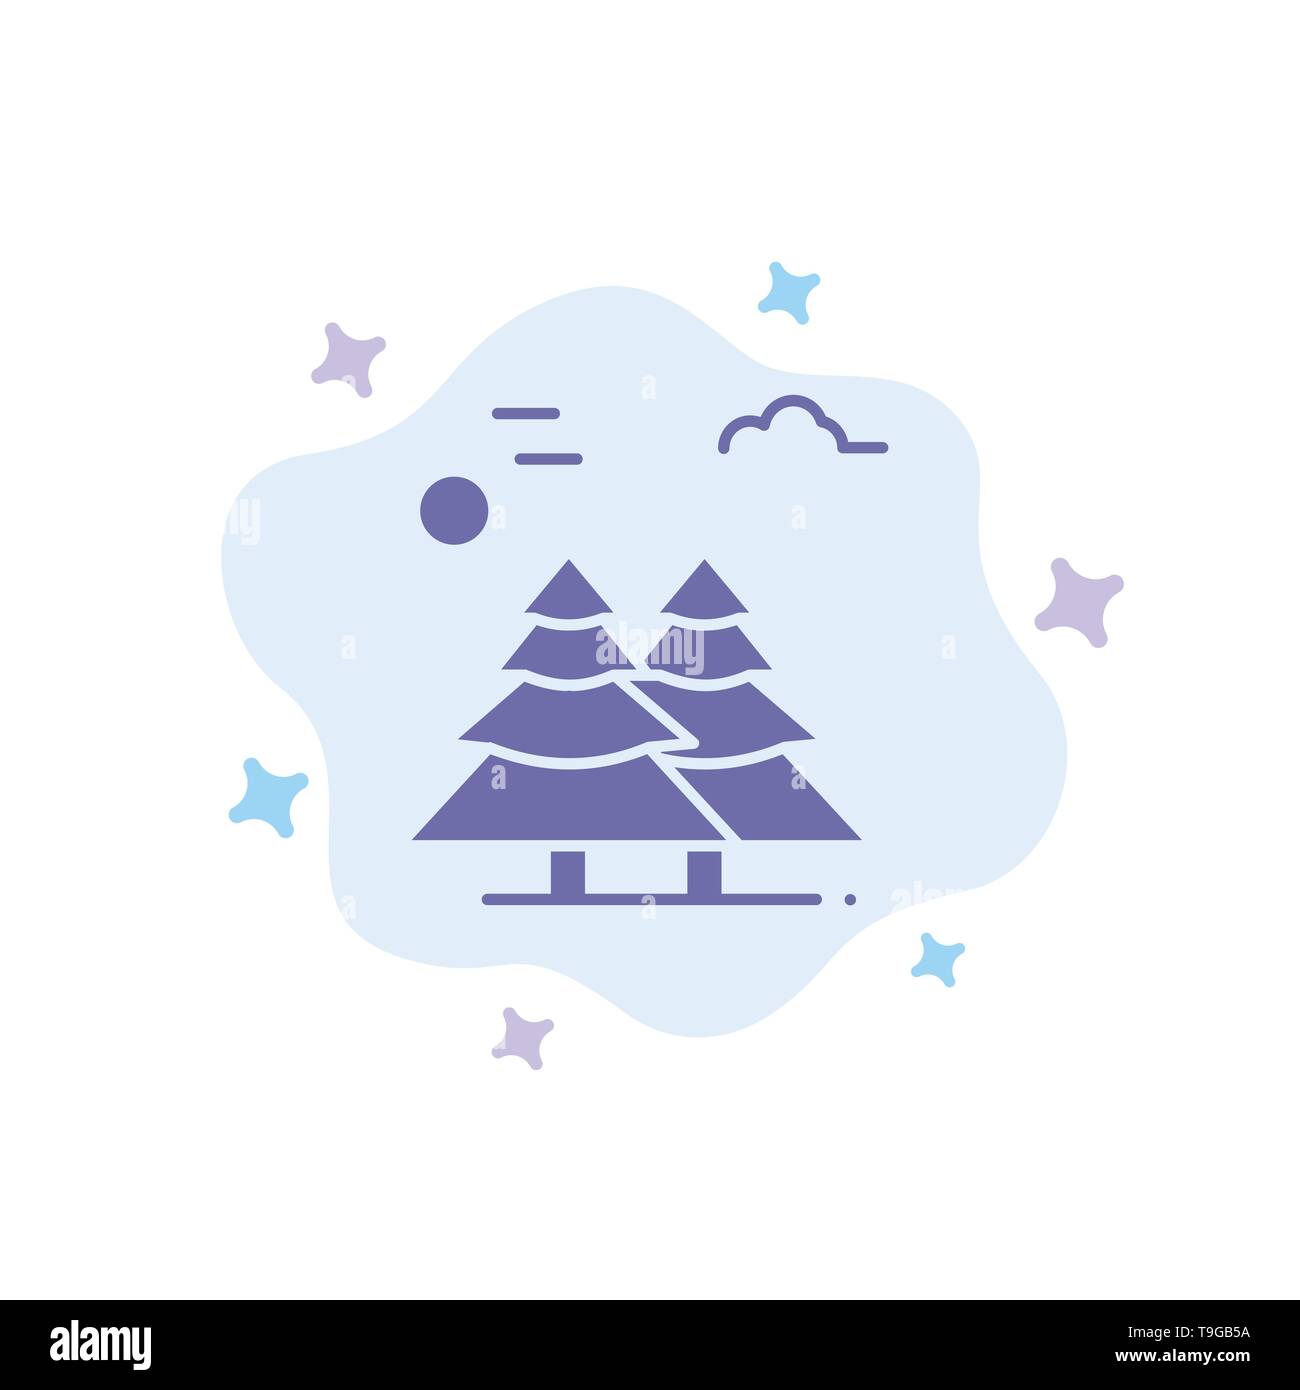 Alpine, Arctic, Canada, Pine Trees, Scandinavia Blue Icon on Abstract Cloud Background Stock Vector